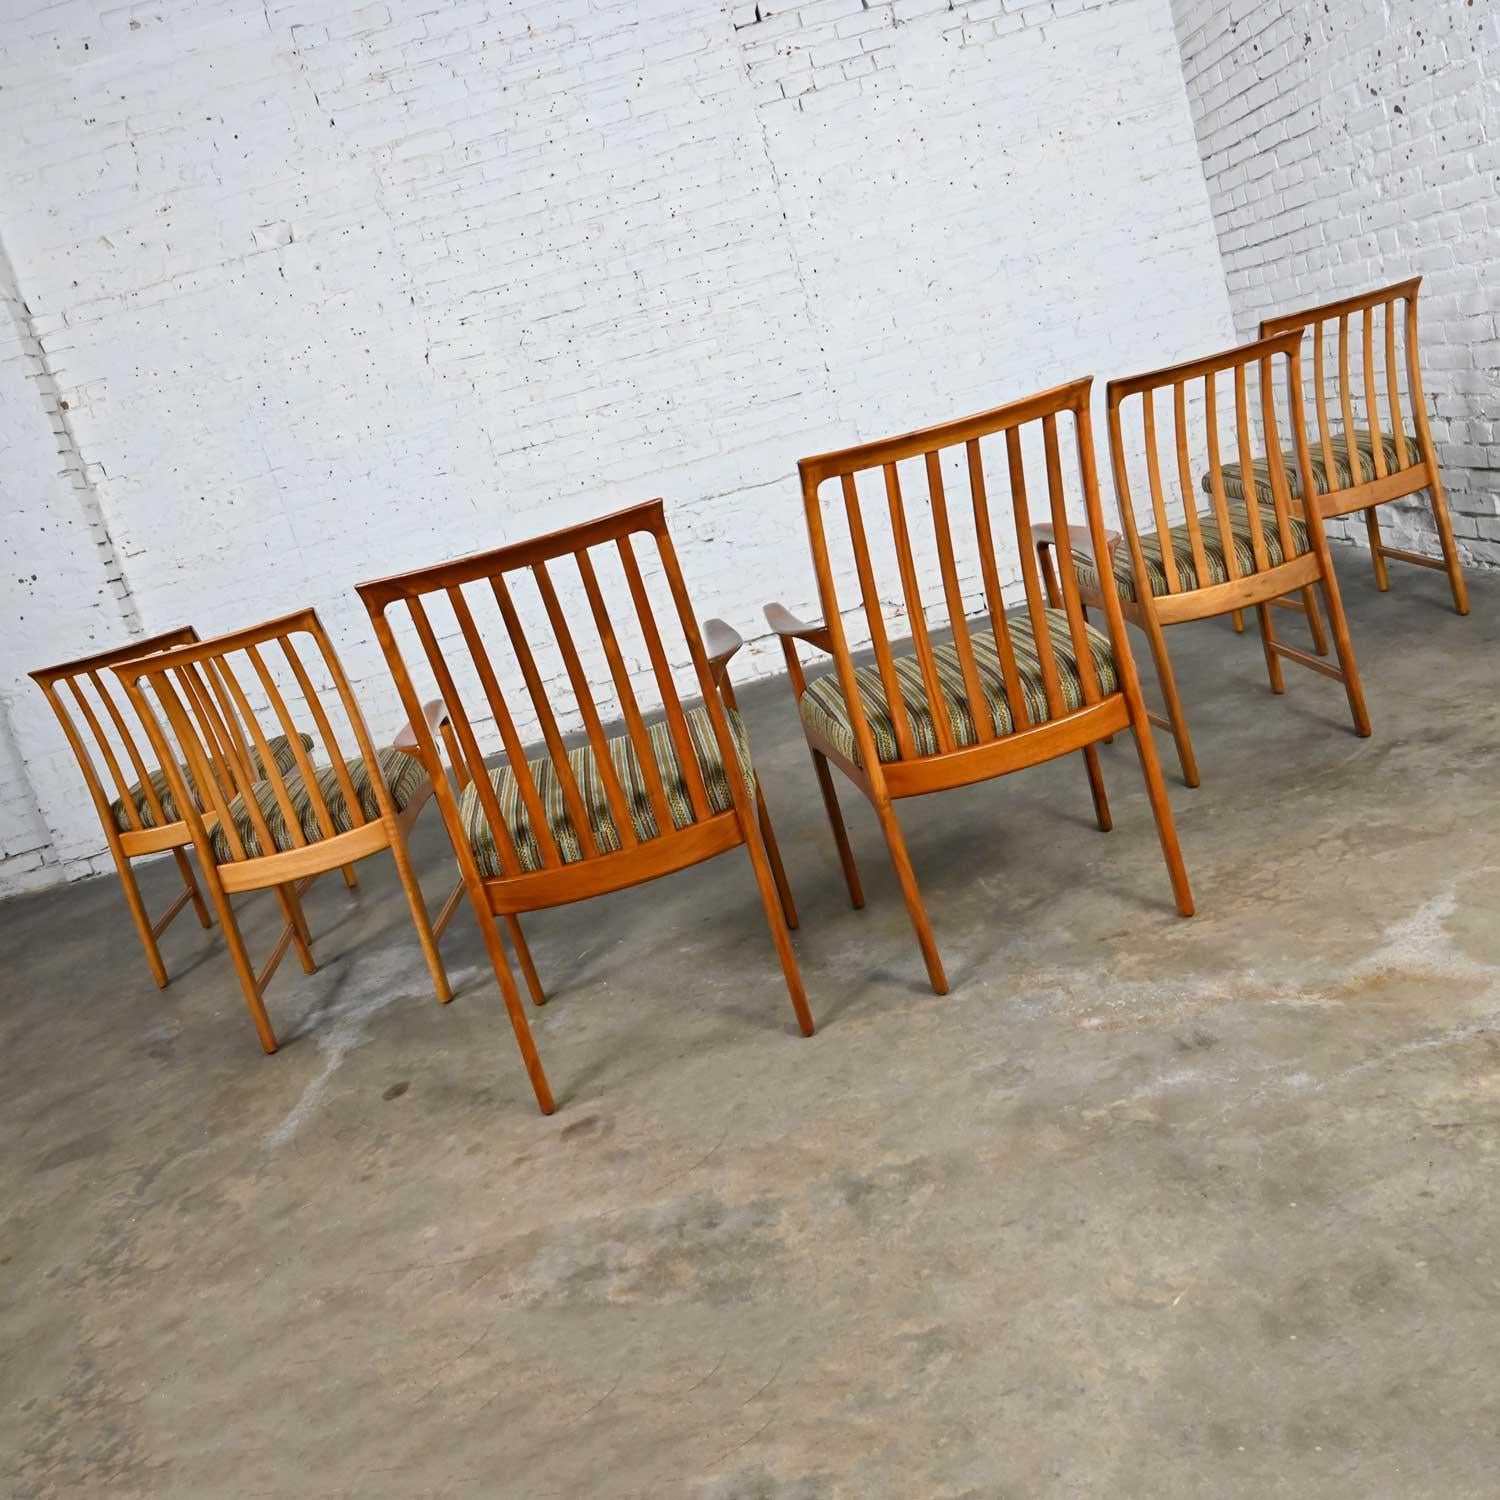 20th Century Vintage Scandinavian Modern Teak Dining Chairs by Folke Ohlsson for DUX Set of 6